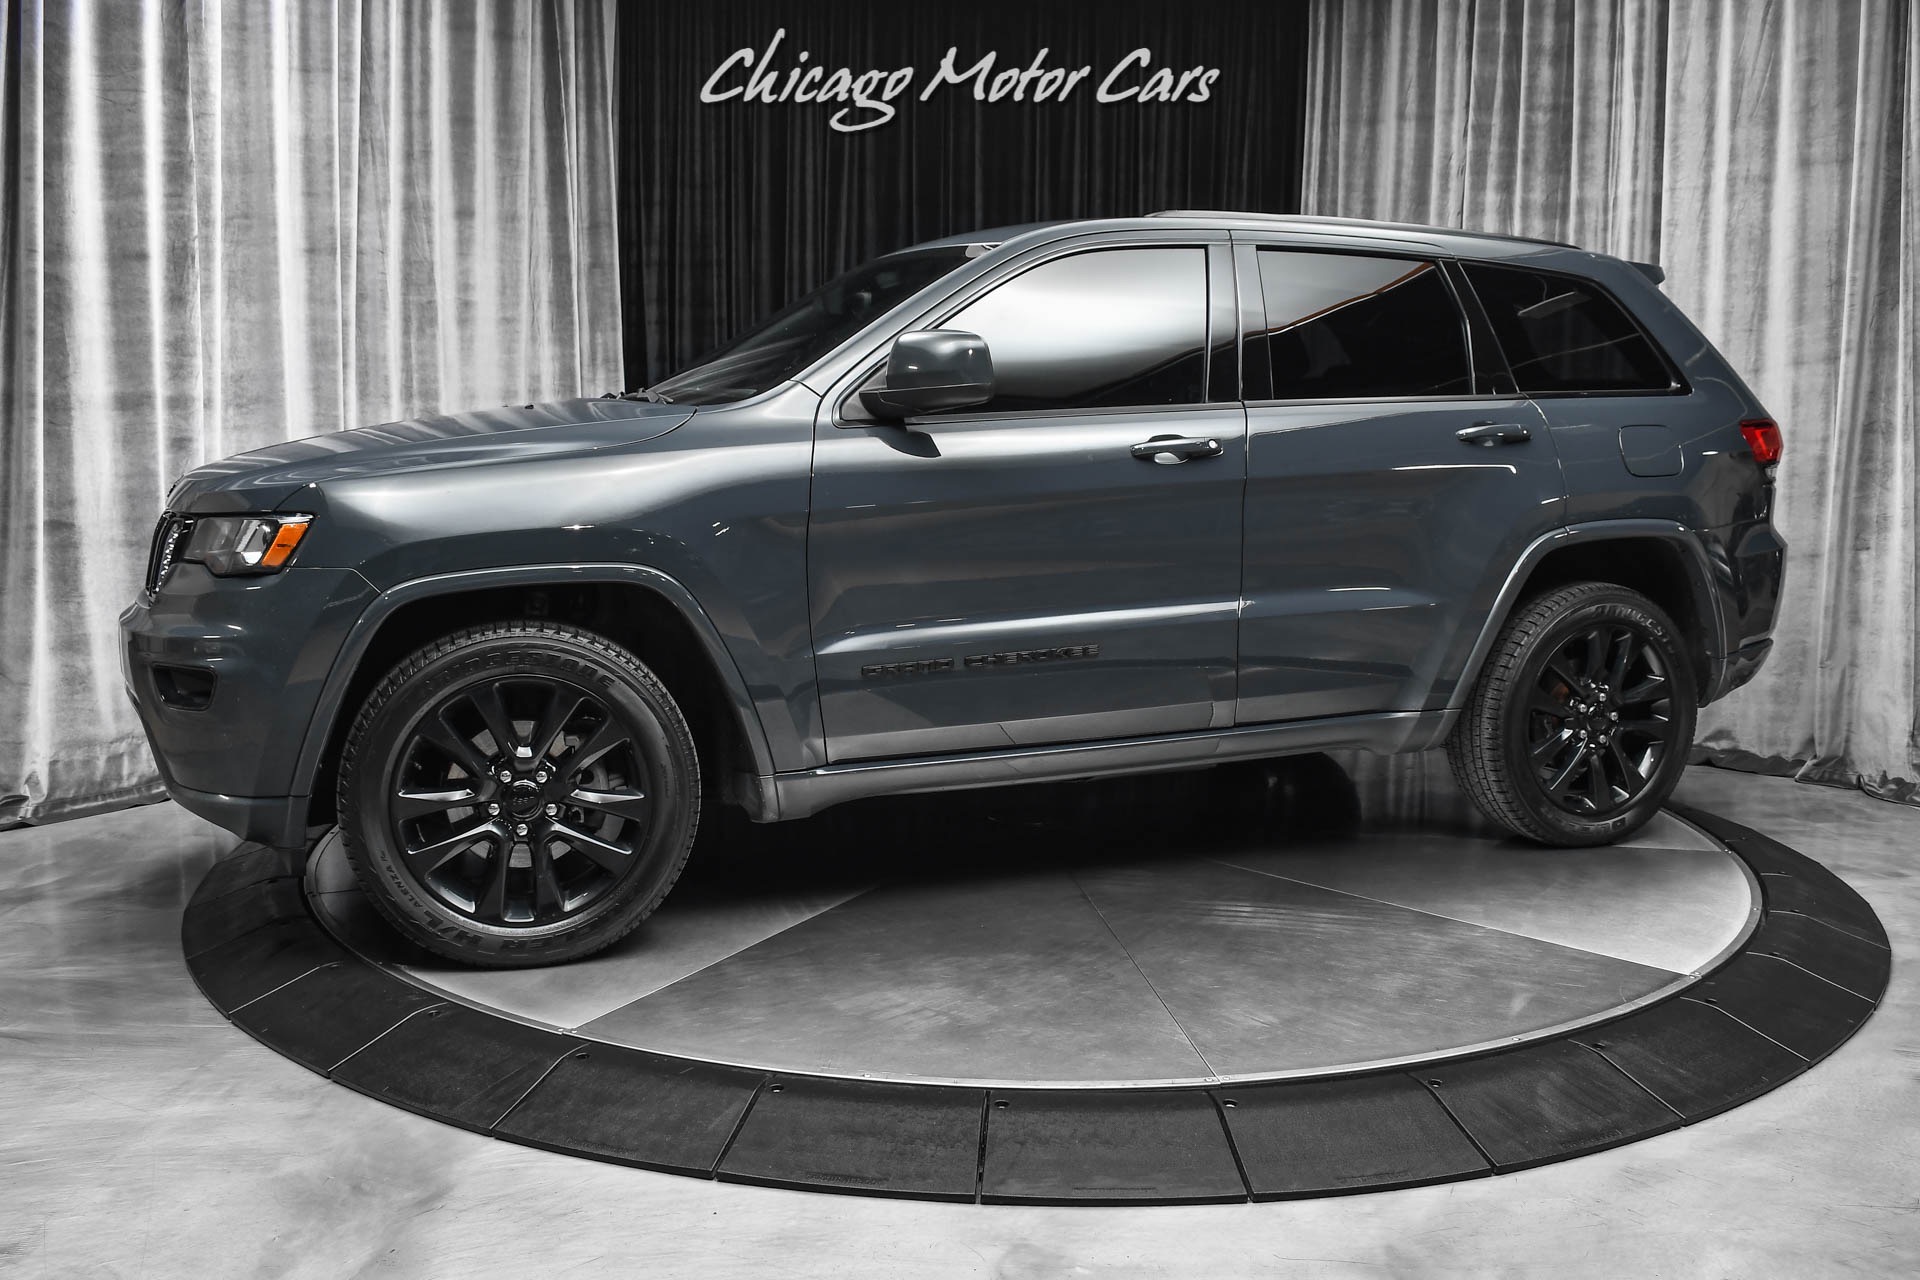 Used 2017 Jeep Grand Cherokee Altitude SUV RARE Rhino Grey Paint UConnect  8.4 Display 20inch Wheels For Sale (Special Pricing)